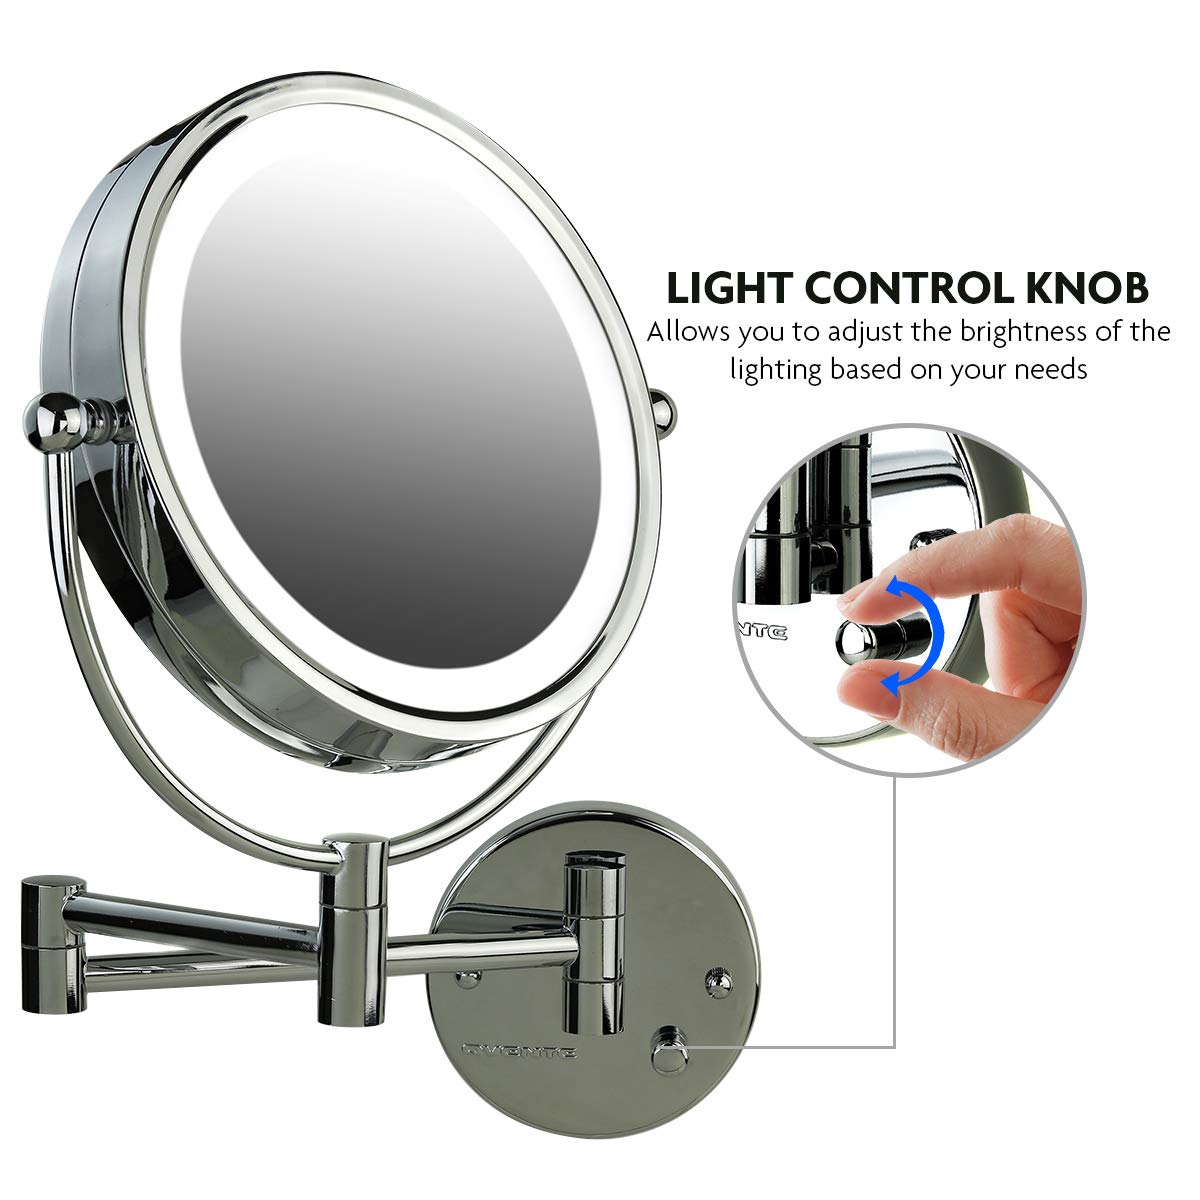 OVENTE 8.5'' Hardwired Lighted Wall Mount Makeup Mirror, 1X & 7X Magnifier, Polished Chrome MPWD3185CH1X7X - image 4 of 8